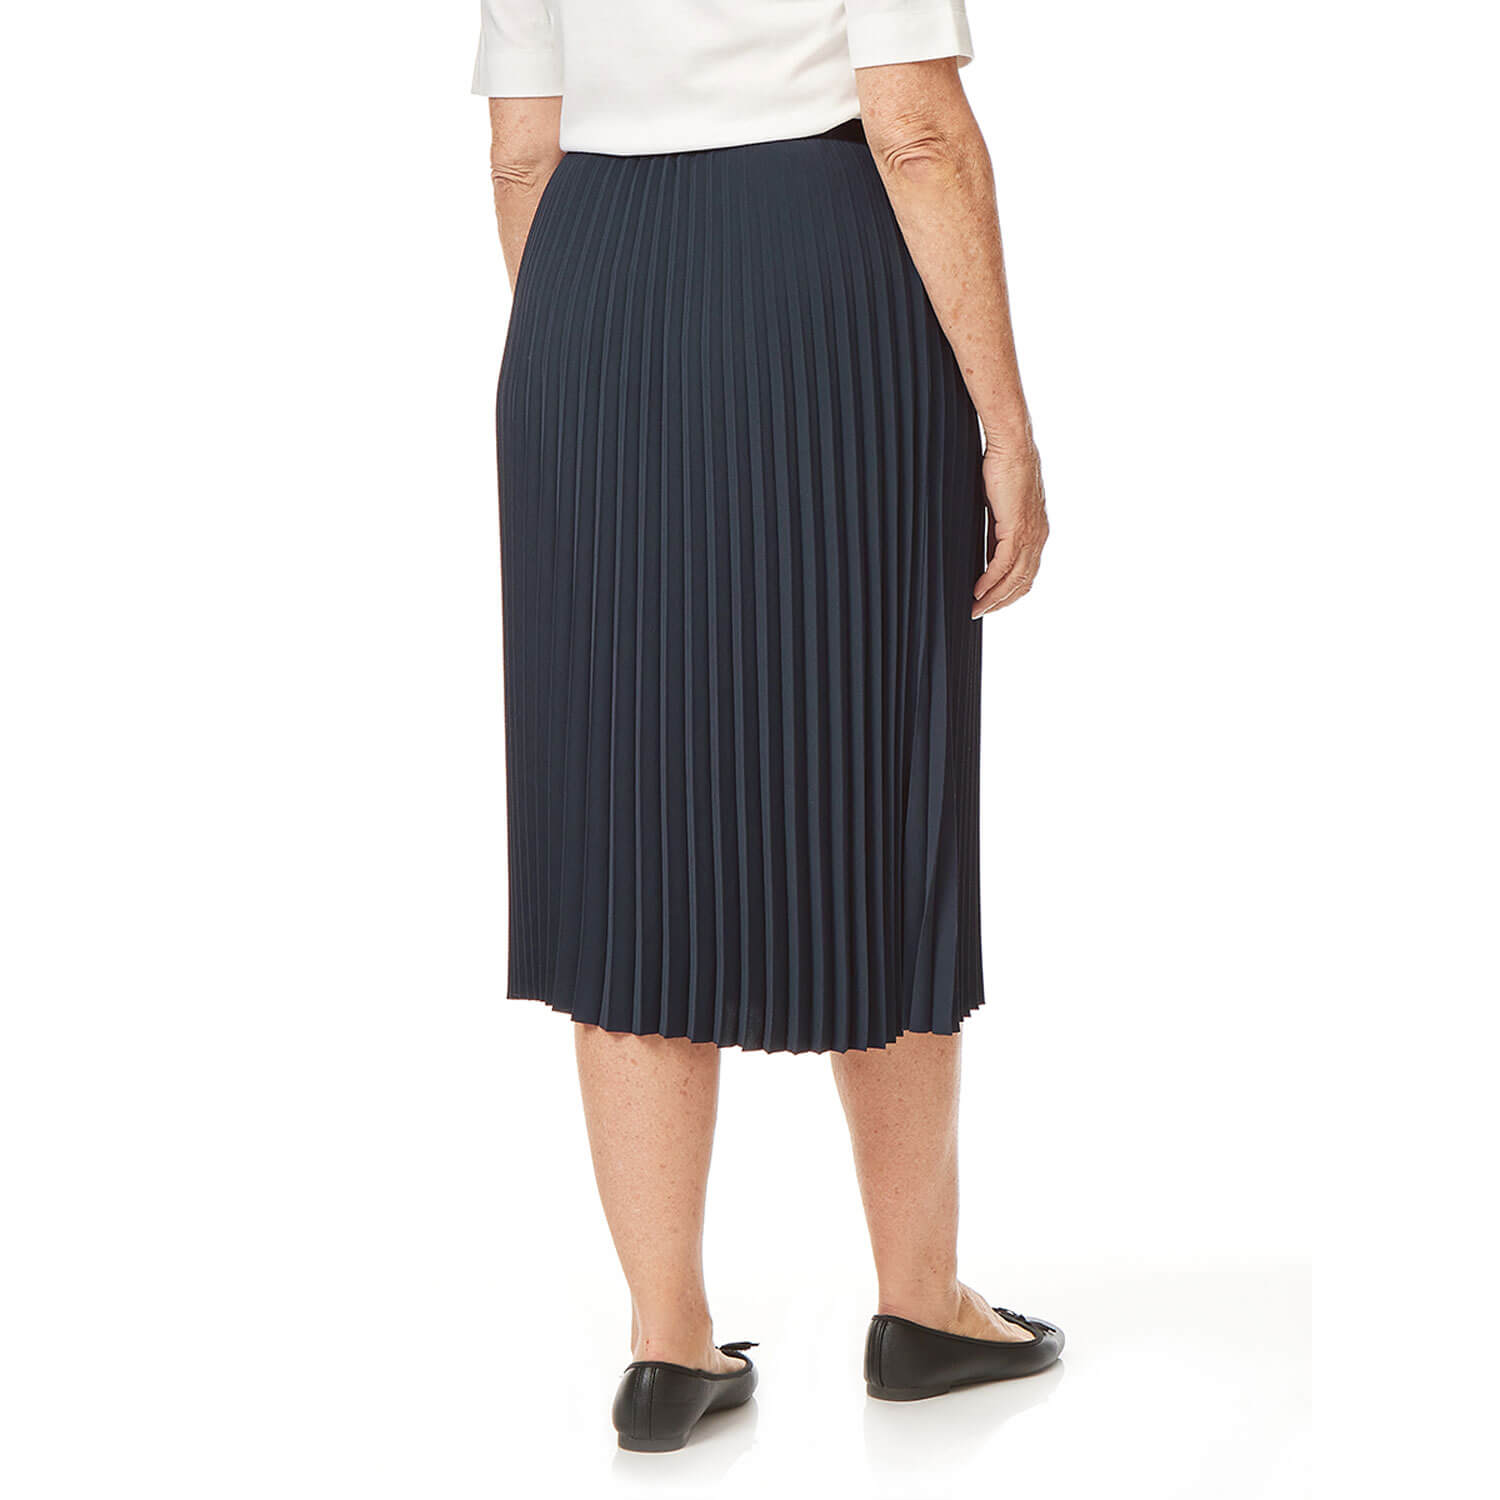 Tigiwear Pleated Solid Skirt 2 Shaws Department Stores